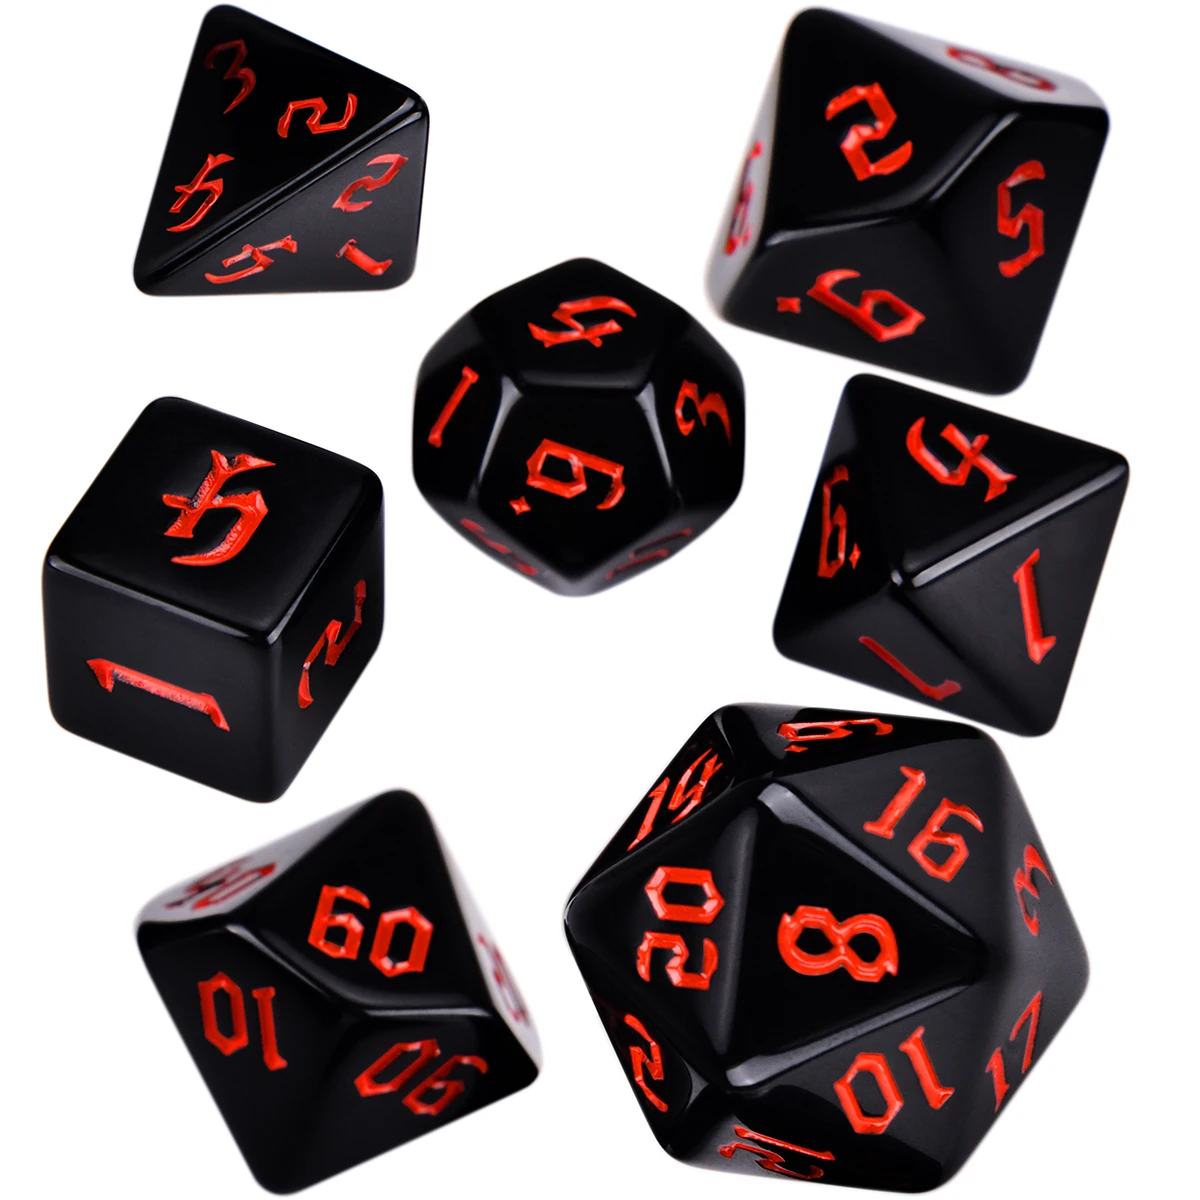 

Opaque Colors Polyhedral 7-Piece RPG Dice Set D4 D6 D8 D10 D% D12 D20 for Tabletop Role Playing Games DND